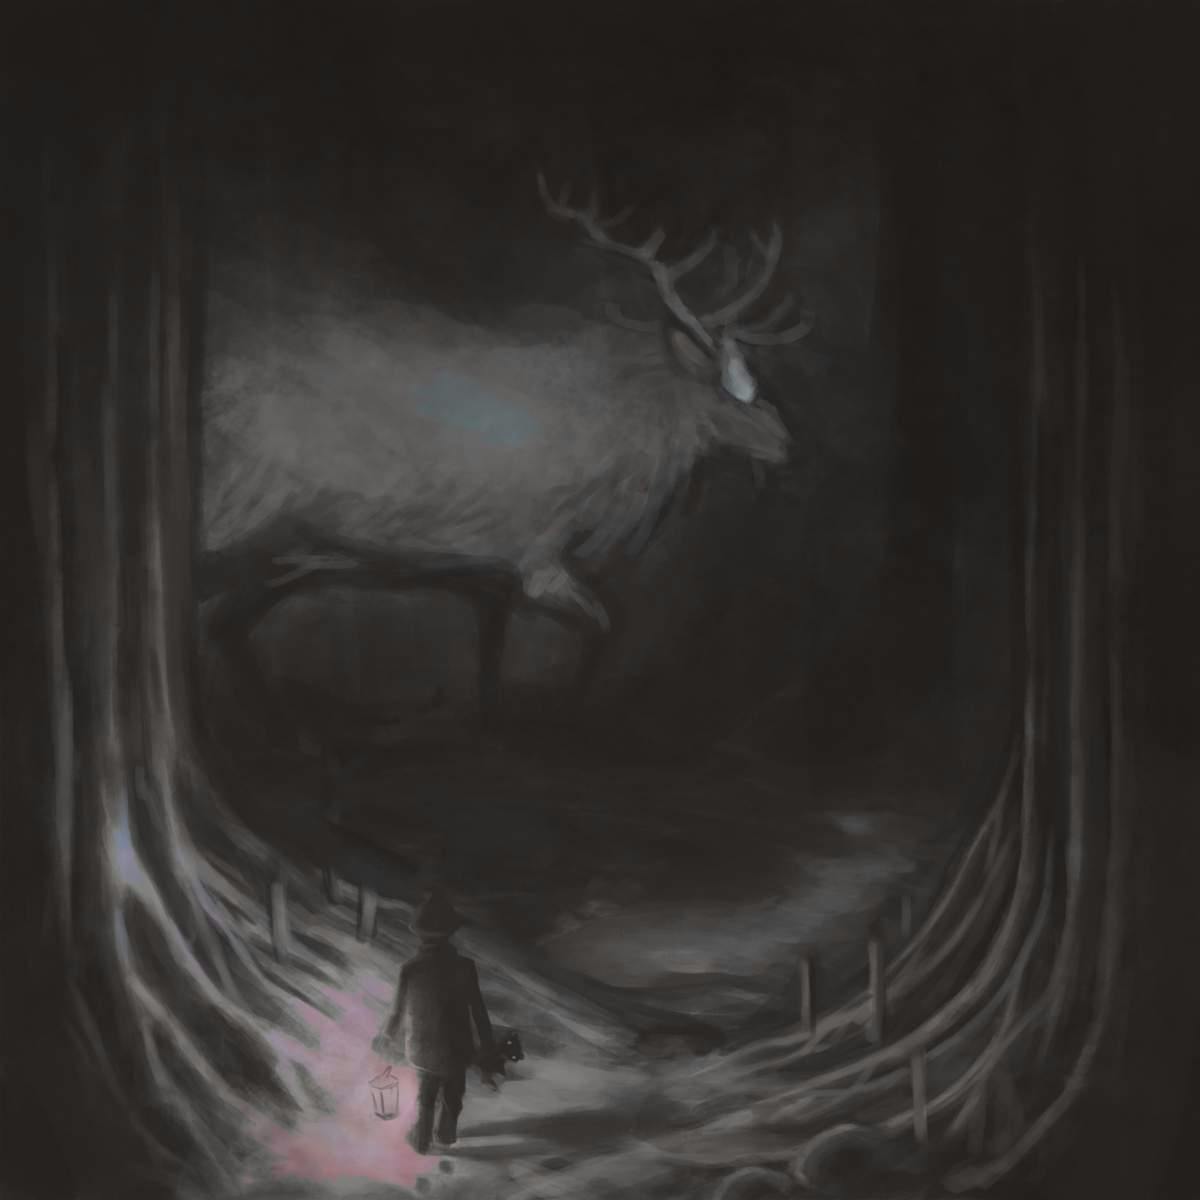 Person with lantern walking in dark woods towards a ghostly stag.